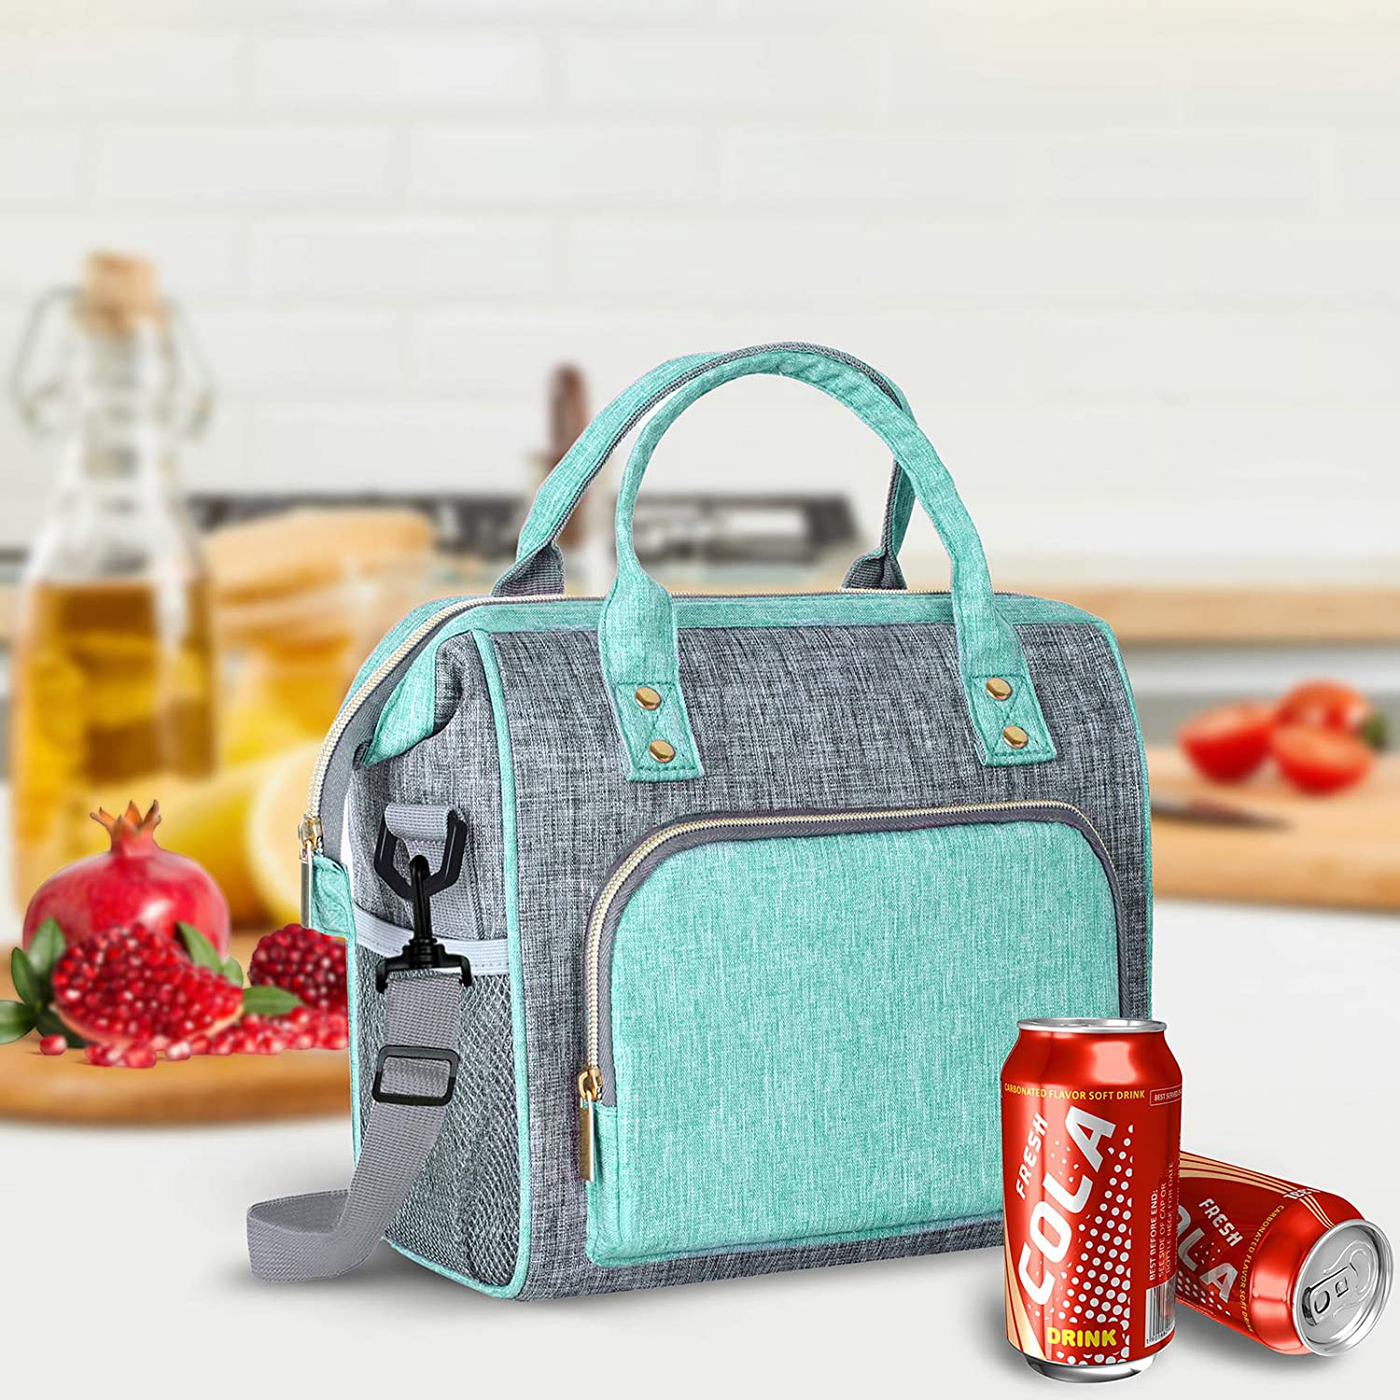 Lunch Bags for Women, Insulated Lunch Bag Reusable Lunch Bag Leakproof Large Lunch Bag with Adjustable Shoulder Strap, Multi-Pocket Lunch Bag for Work, Office, Picnic, Outdoor